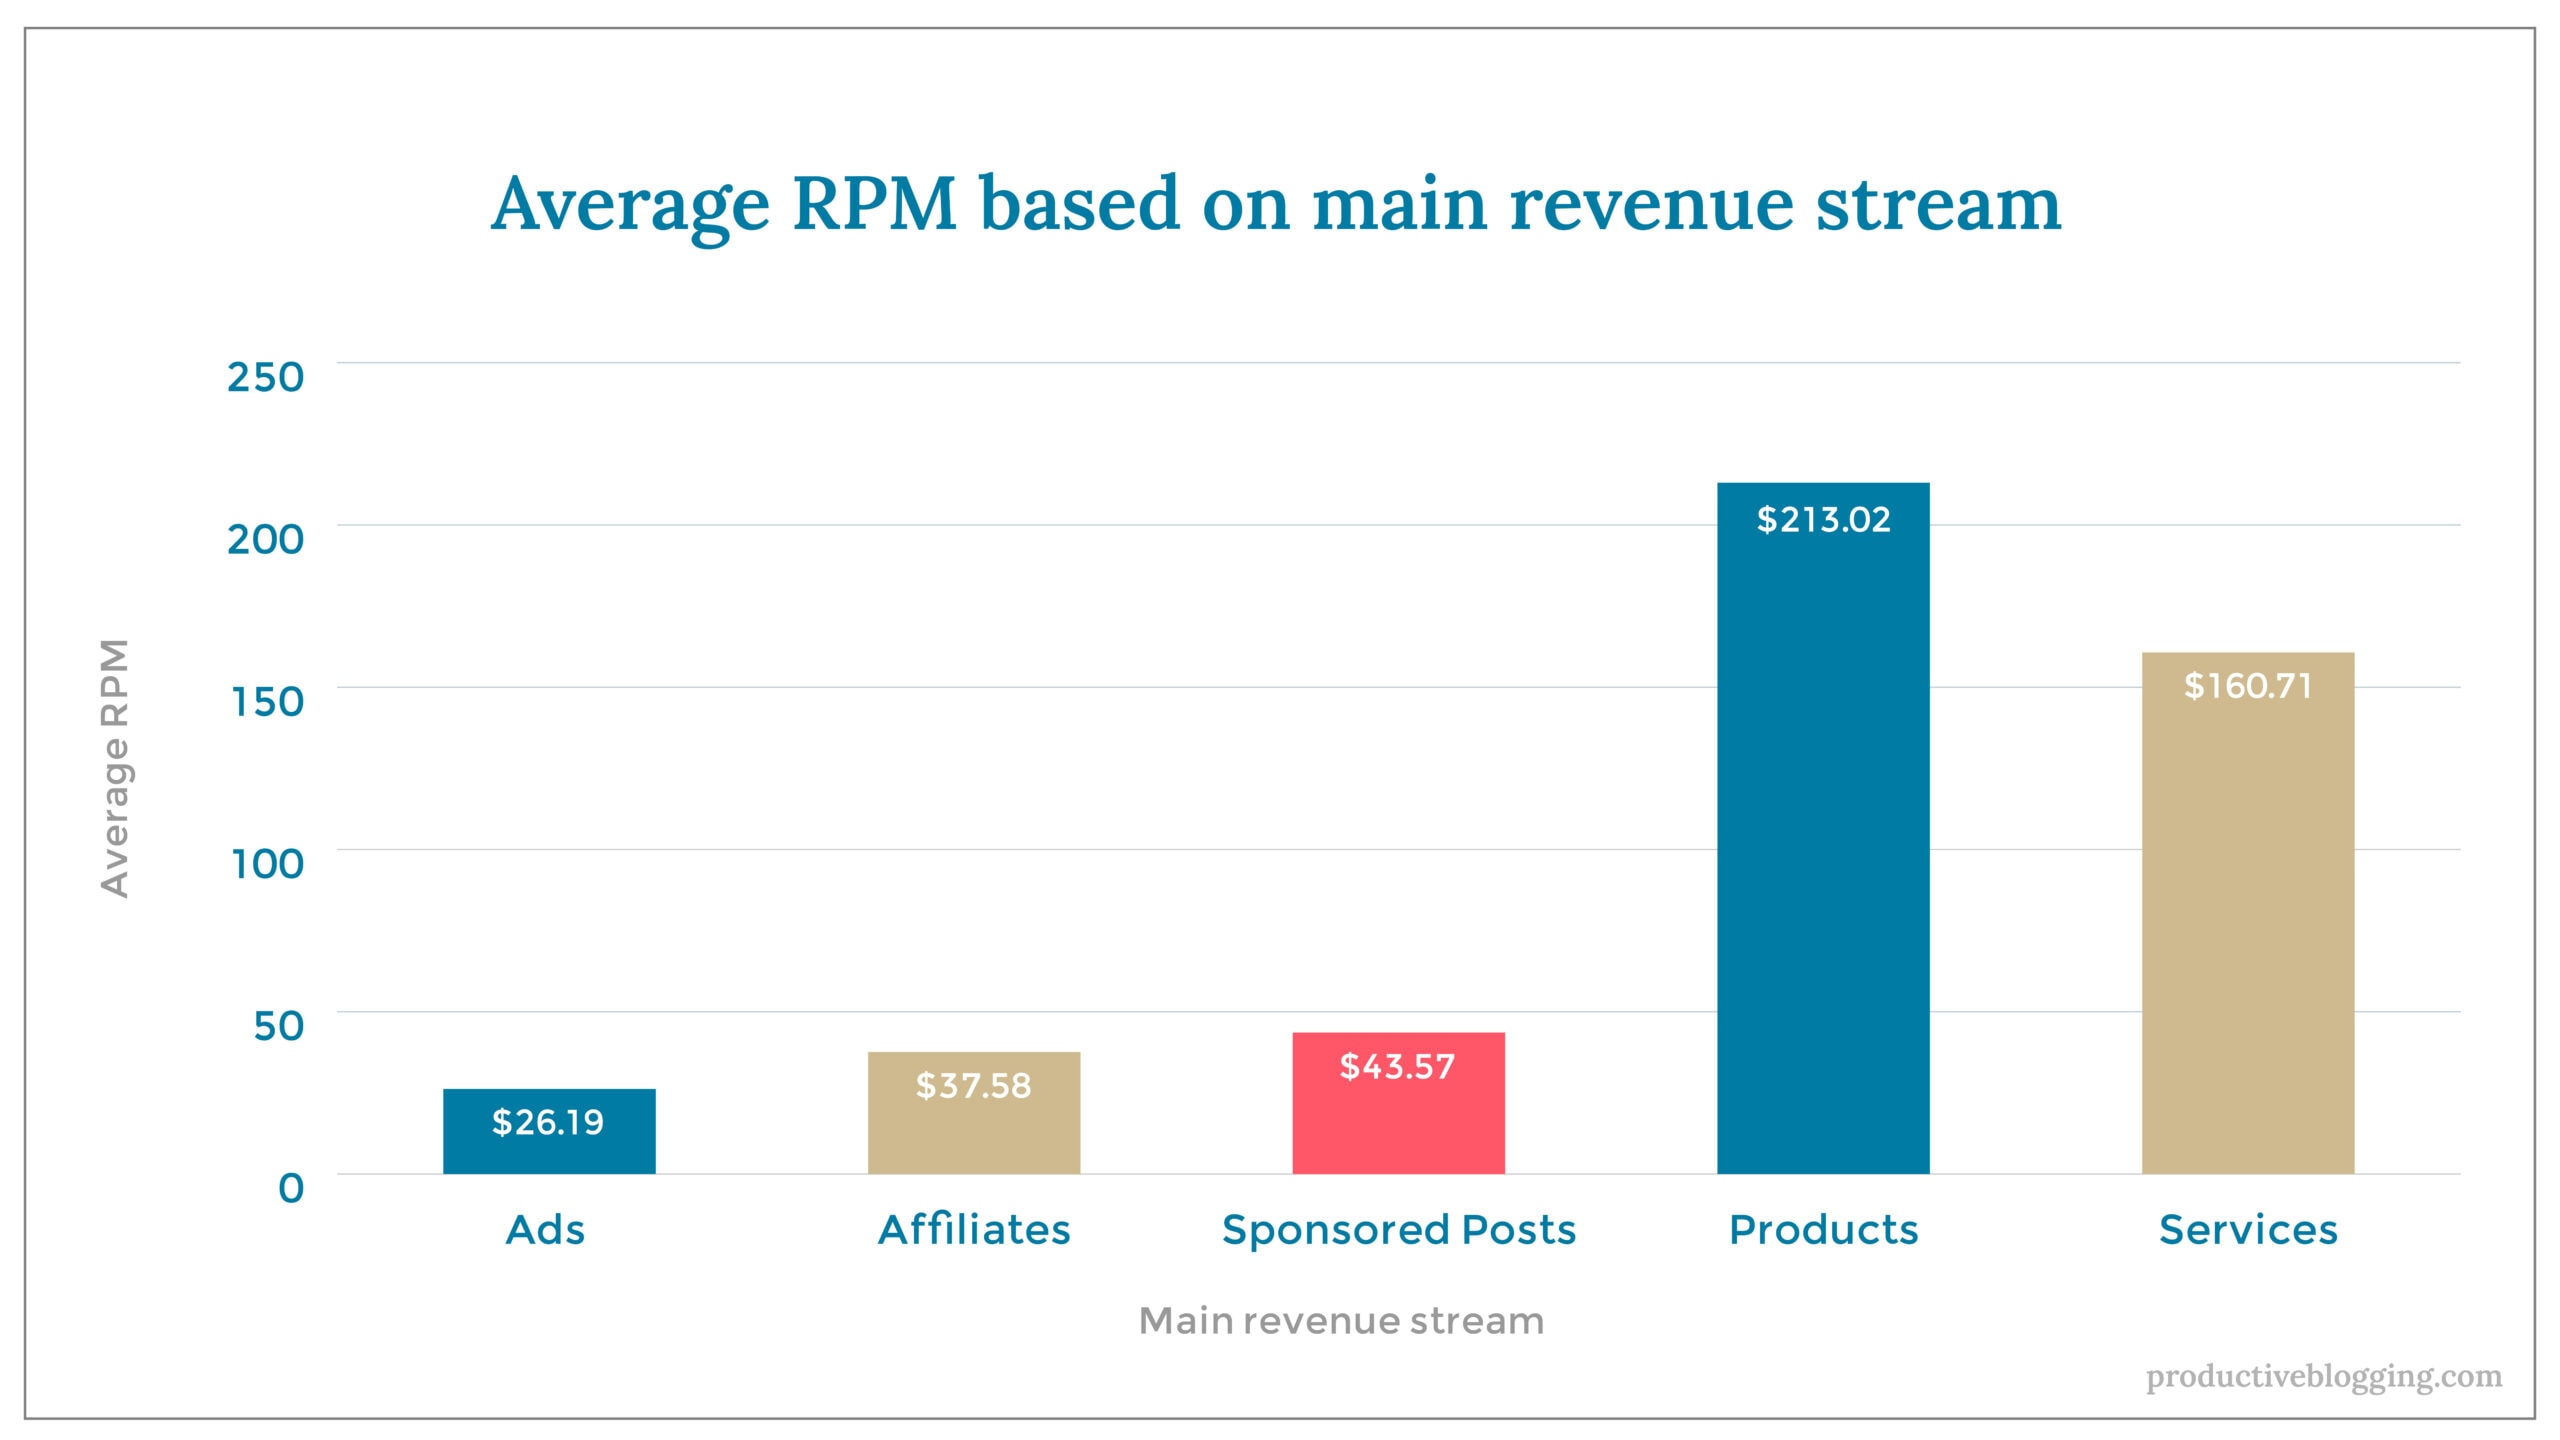 Average RPM based on main revenue stream X axis: Main revenue stream Y axis: Average RPM Ads $26.19 Affiliates $37.58 Sponsored Posts $43.57 Products $213.02 Services $160.71